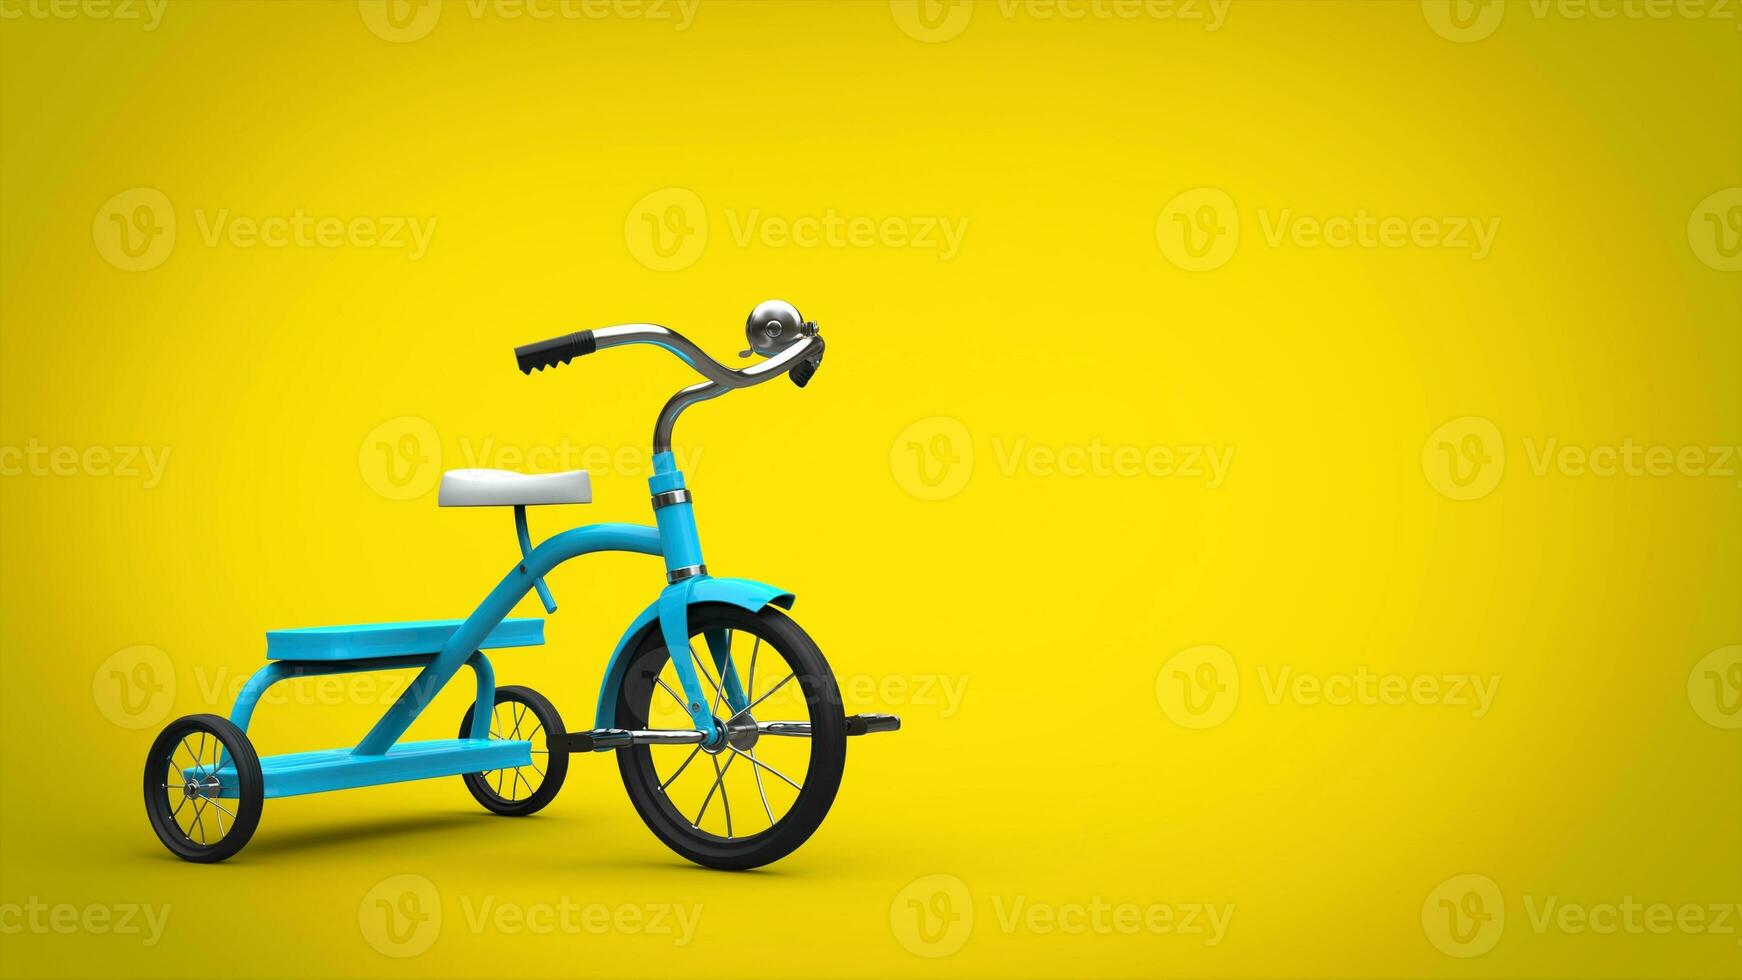 Great blue vintage tricycle photo